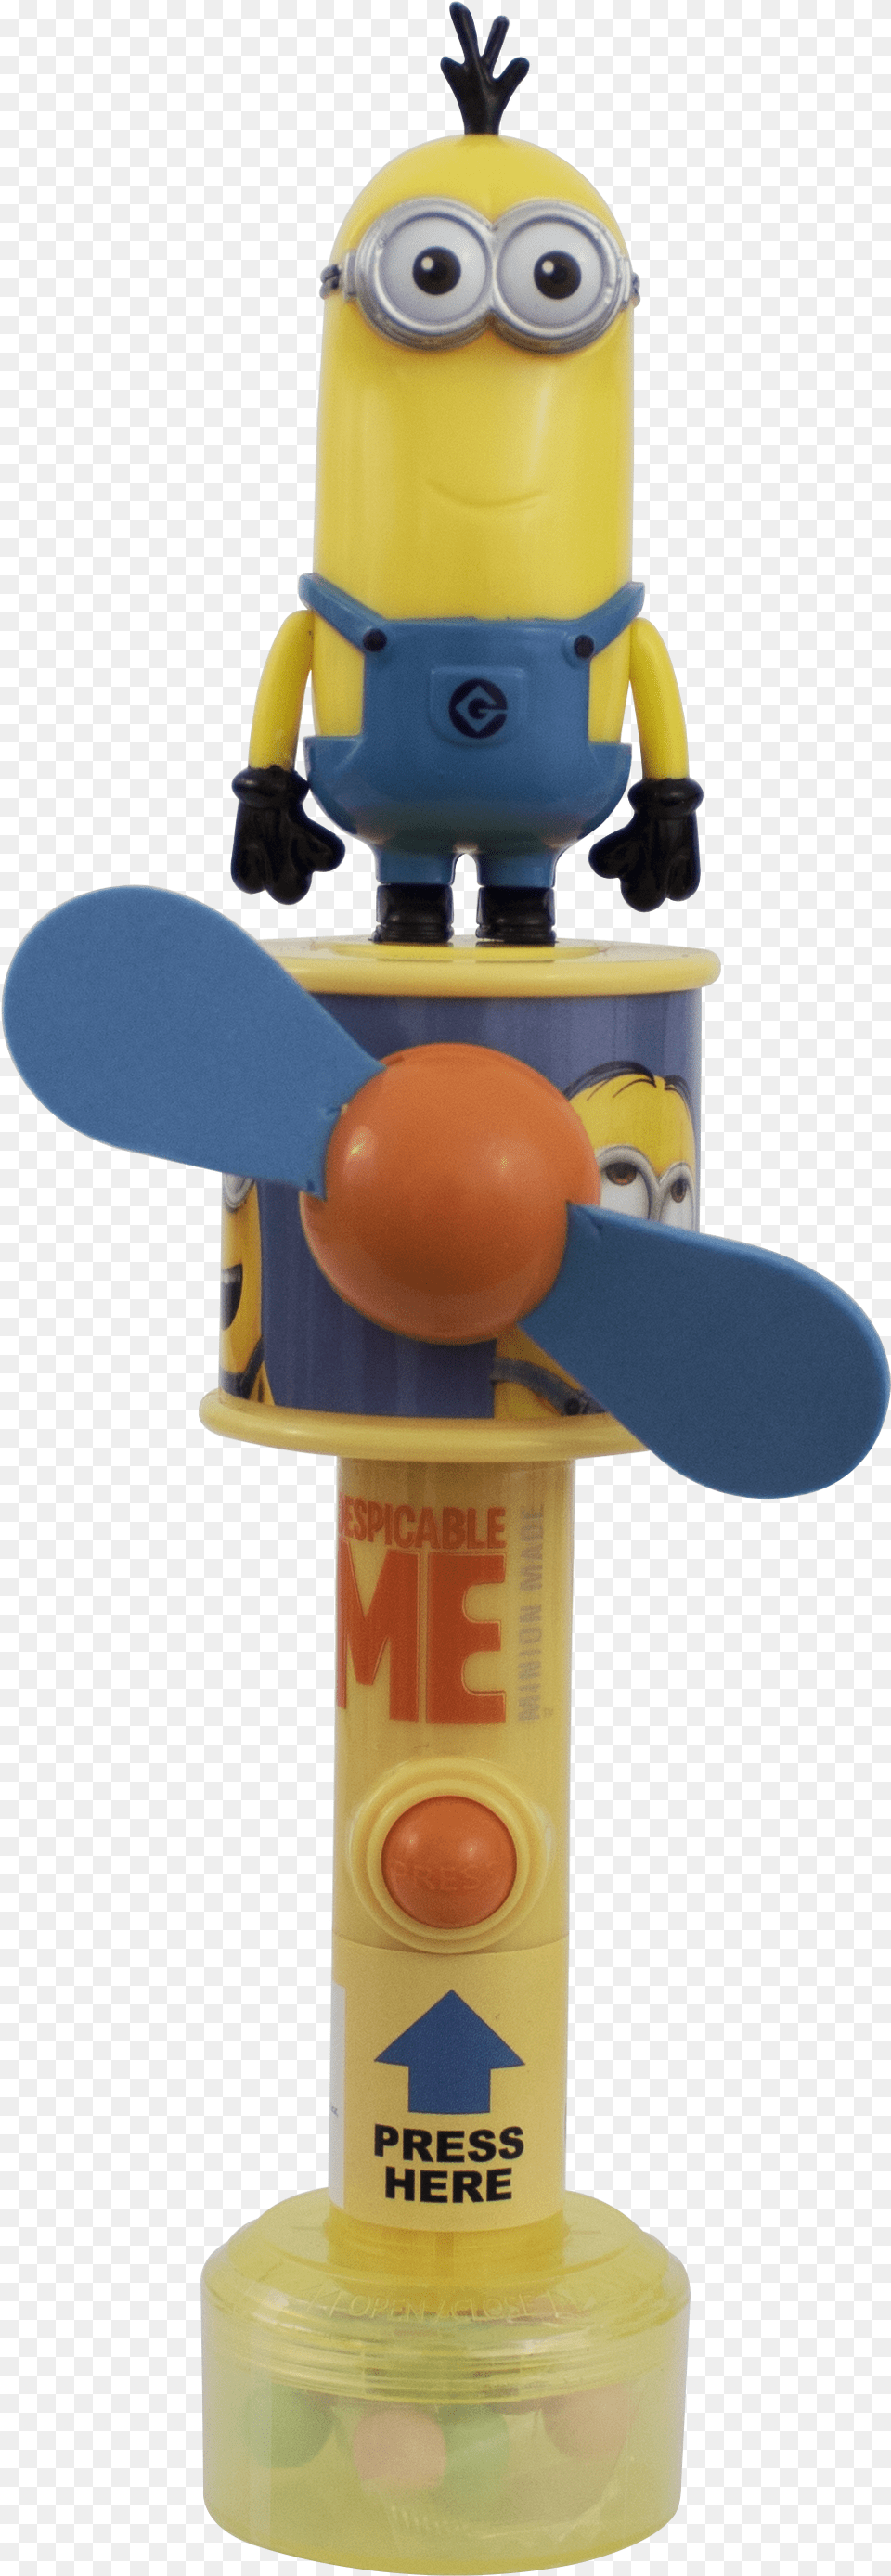 Despicable Me Coolfan With Candy Robot Free Transparent Png